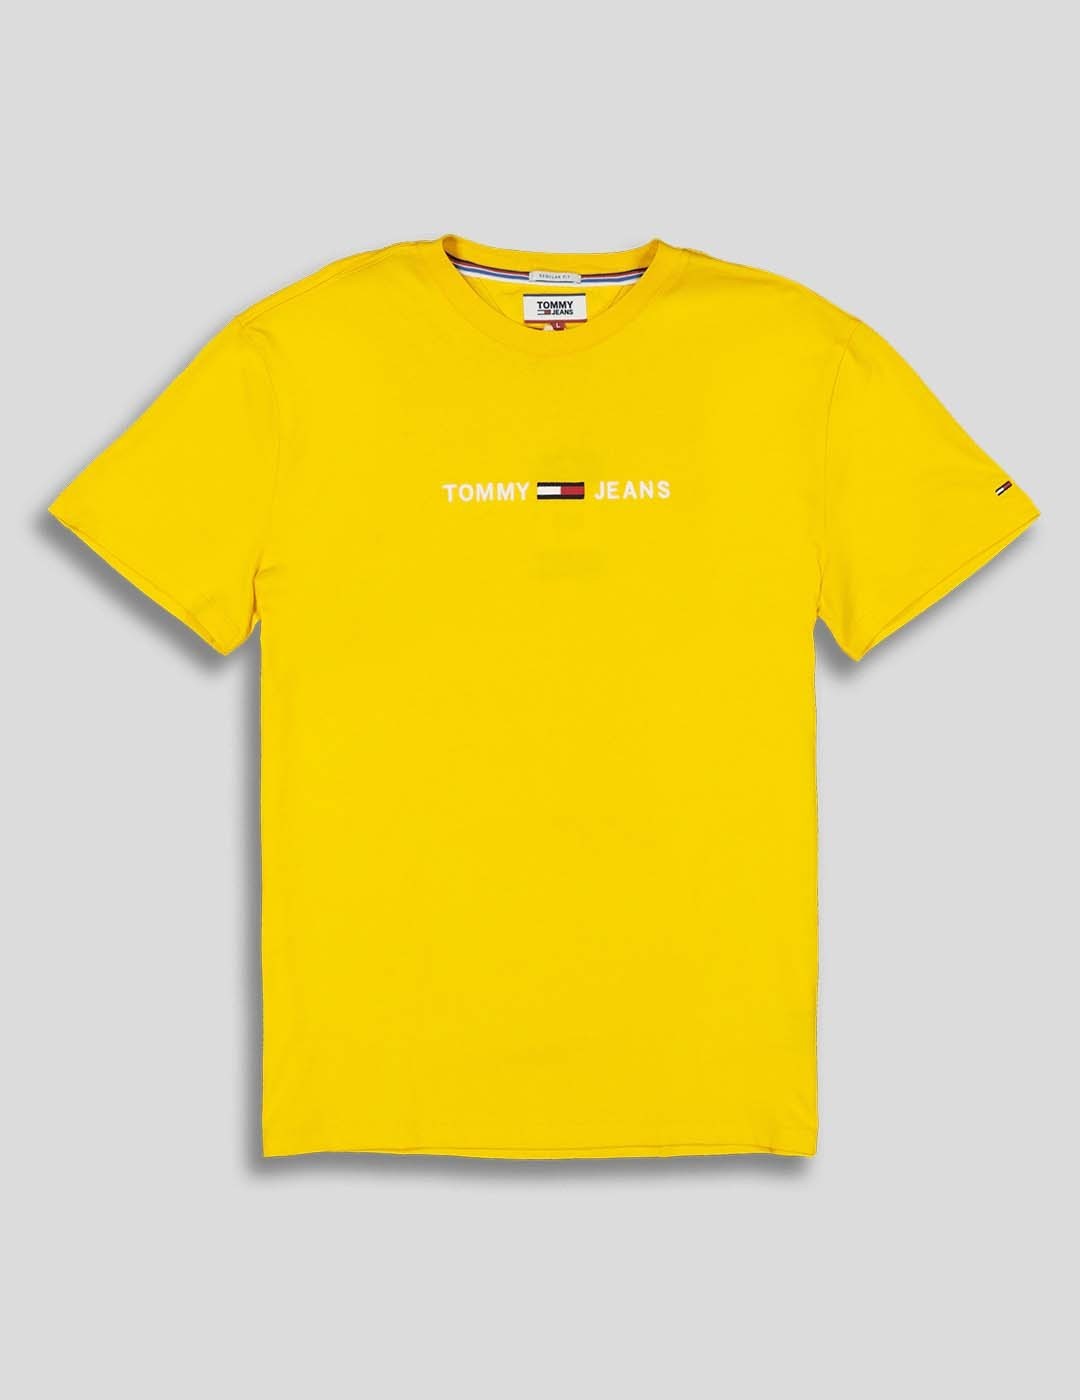 CAMISETA TOMMY JEANS STRAIGHT LOGO TEE VALLELY YELLOW